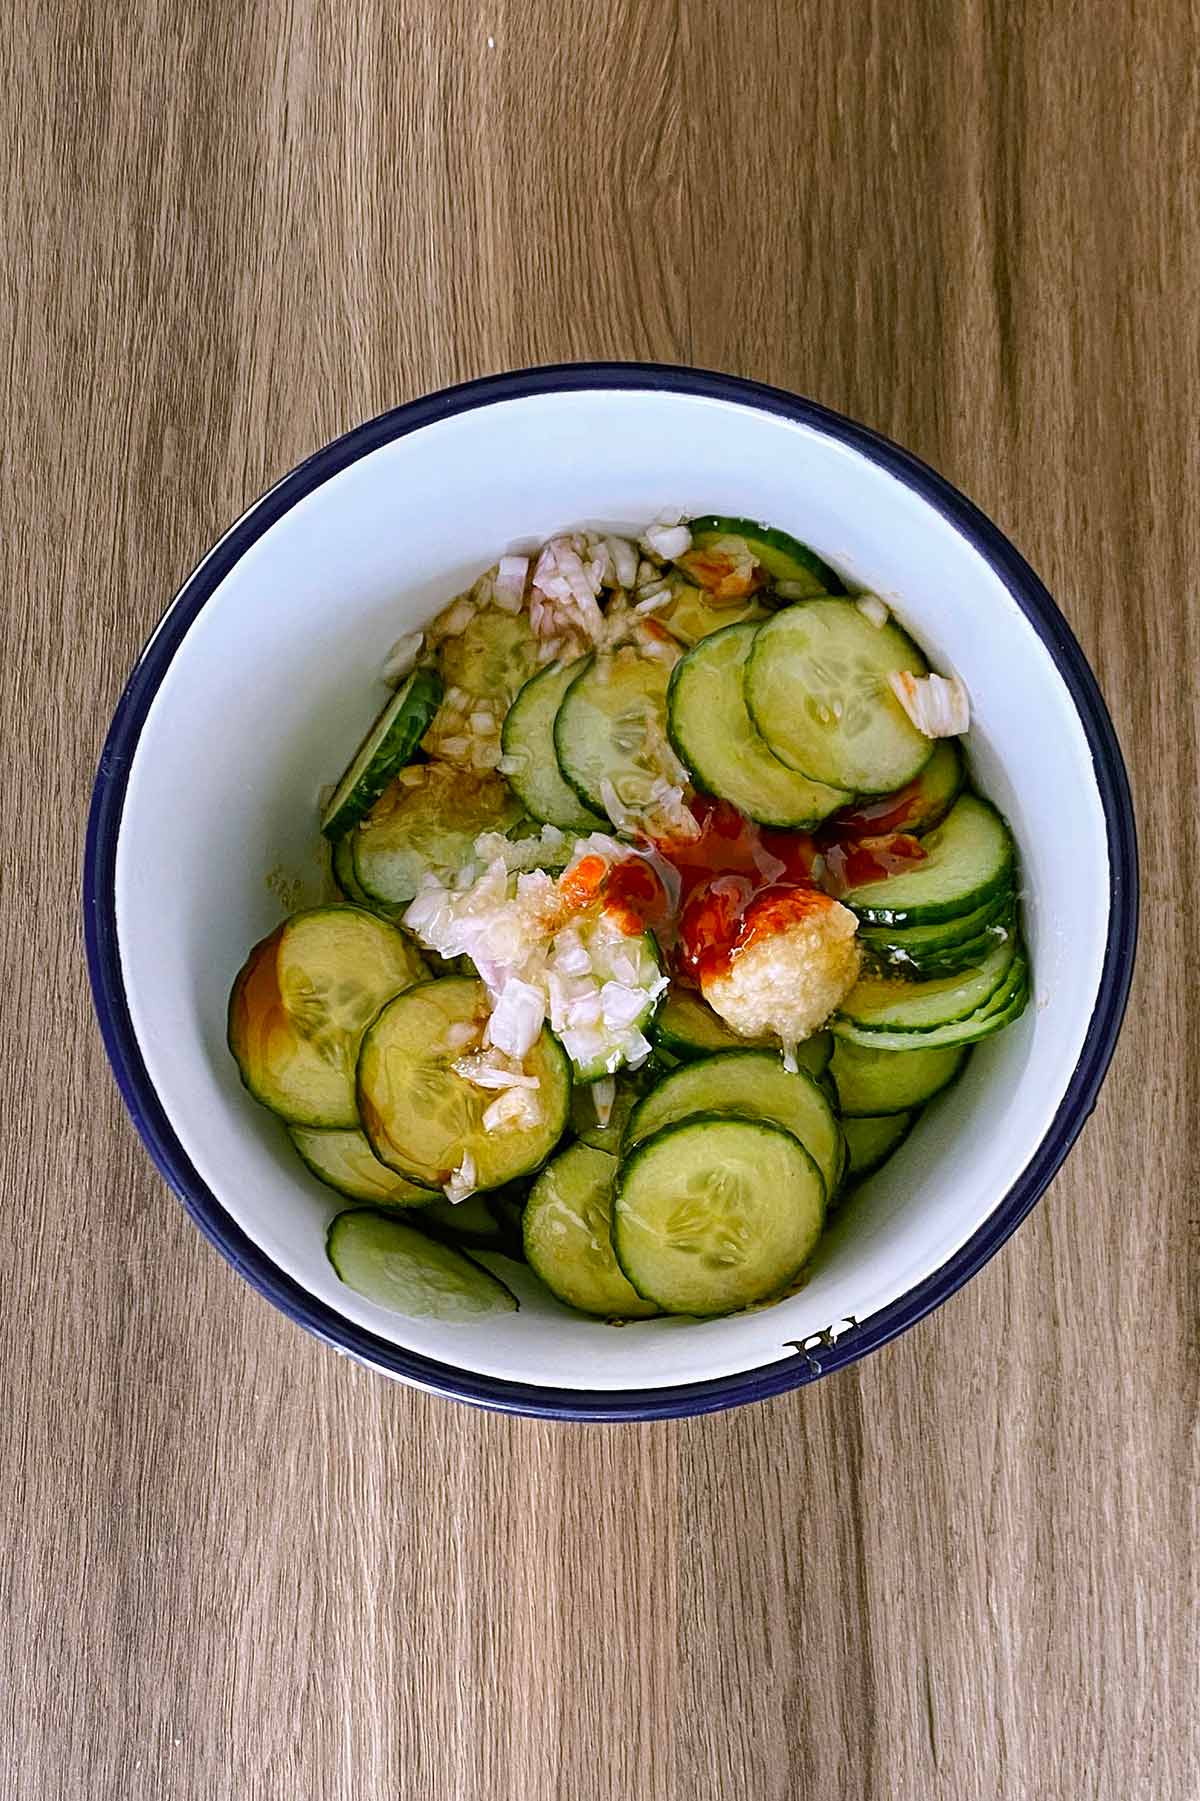 Garlic, ginger, chopped shallots and sauces added to the cucumber.